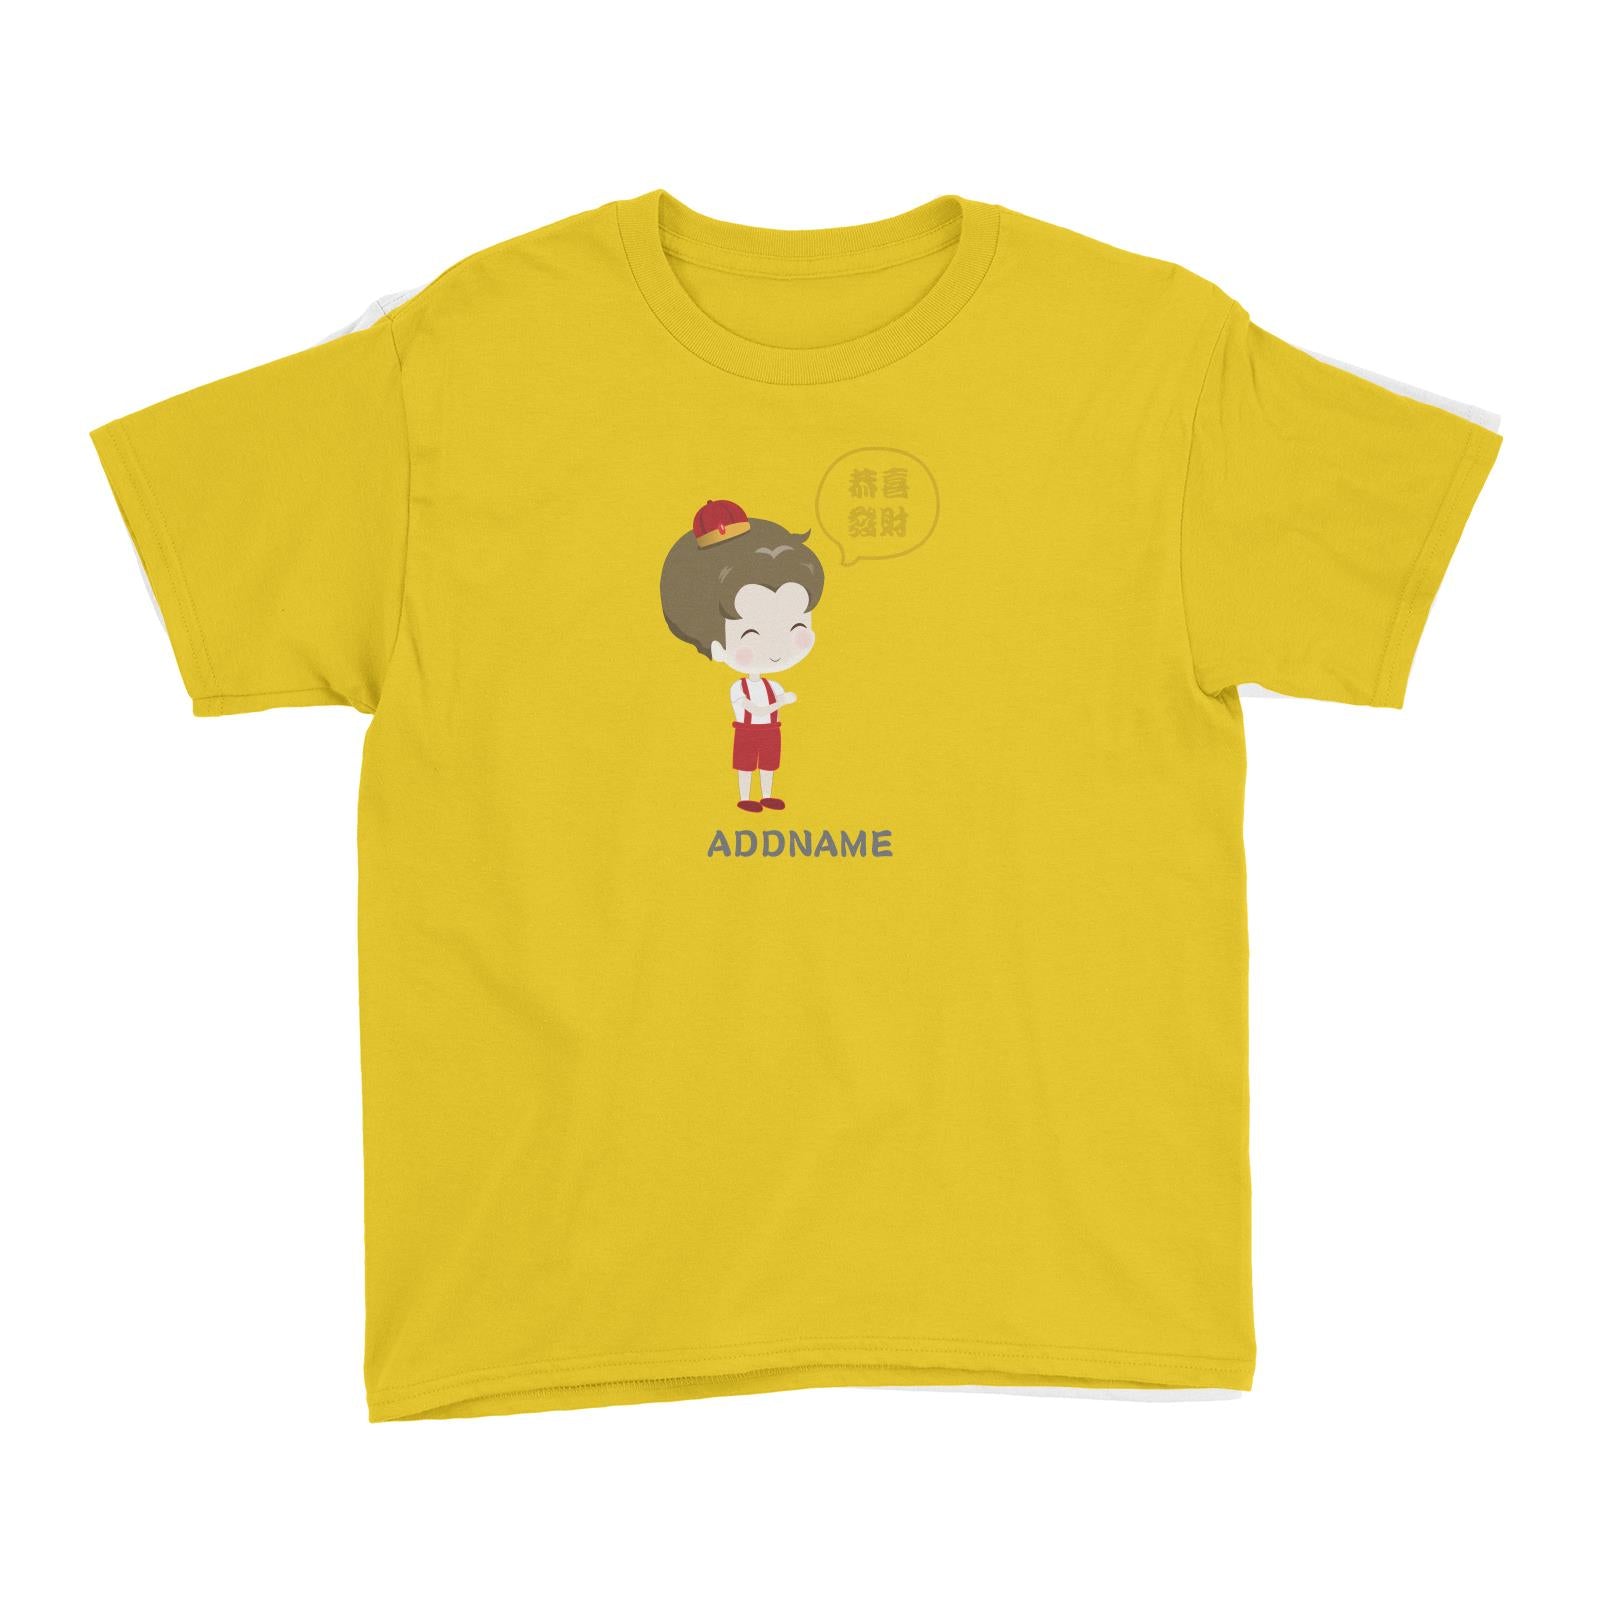 Chinese New Year Family Gong Xi Fai Cai Boy Addname Kid's T-Shirt